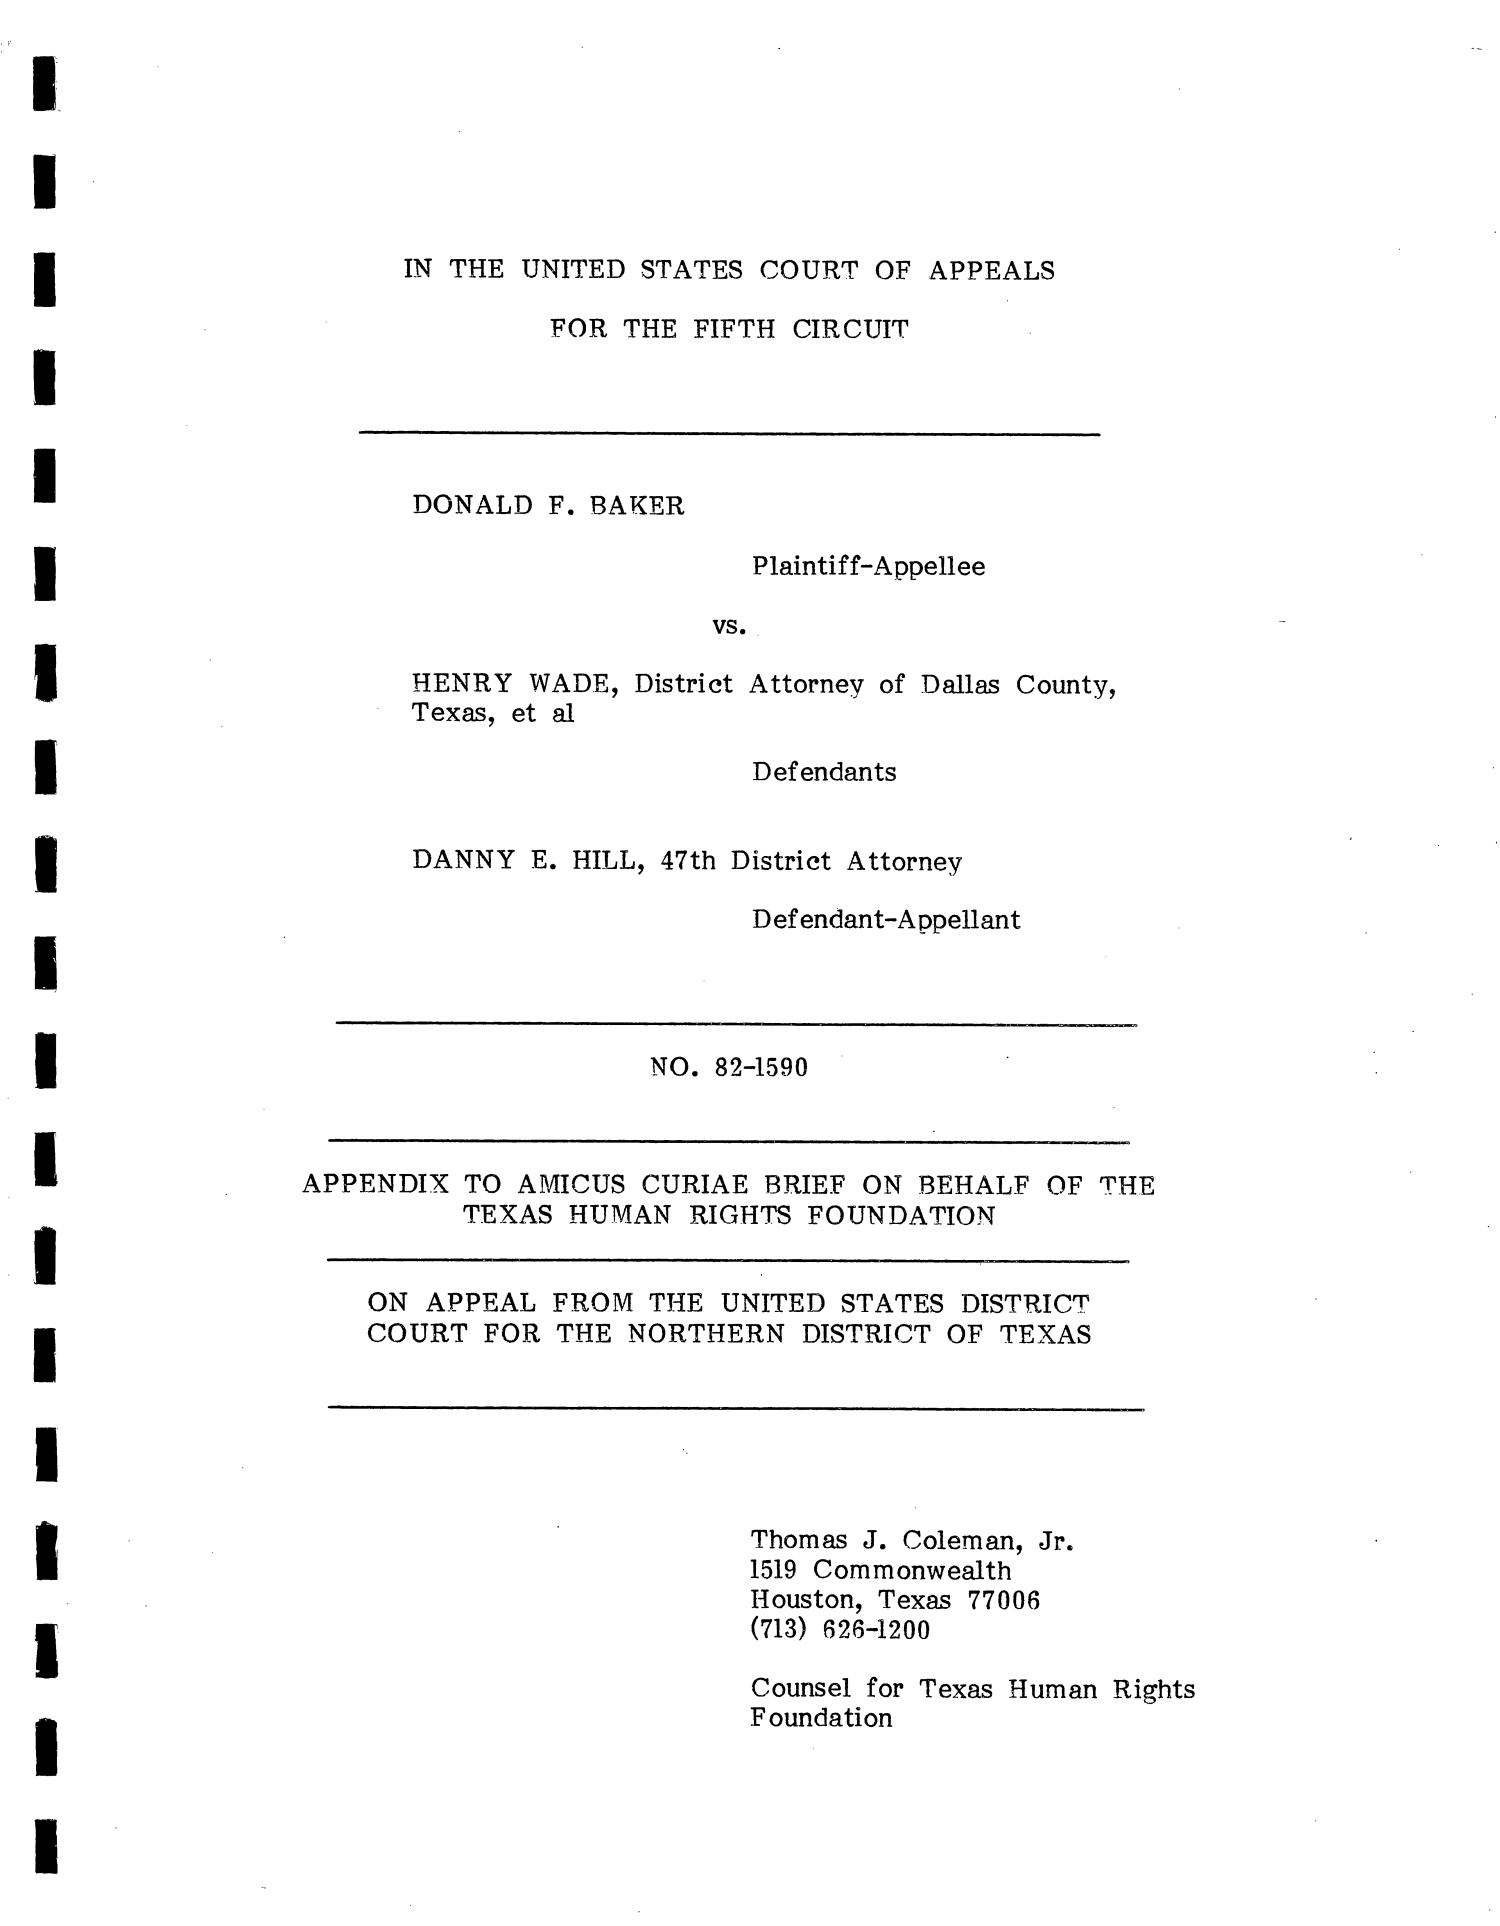 [Amicus Brief Pertaining to the Case of Baker vs. Wade, cause no. 82-1590, 1980.]
                                                
                                                    Title Page
                                                